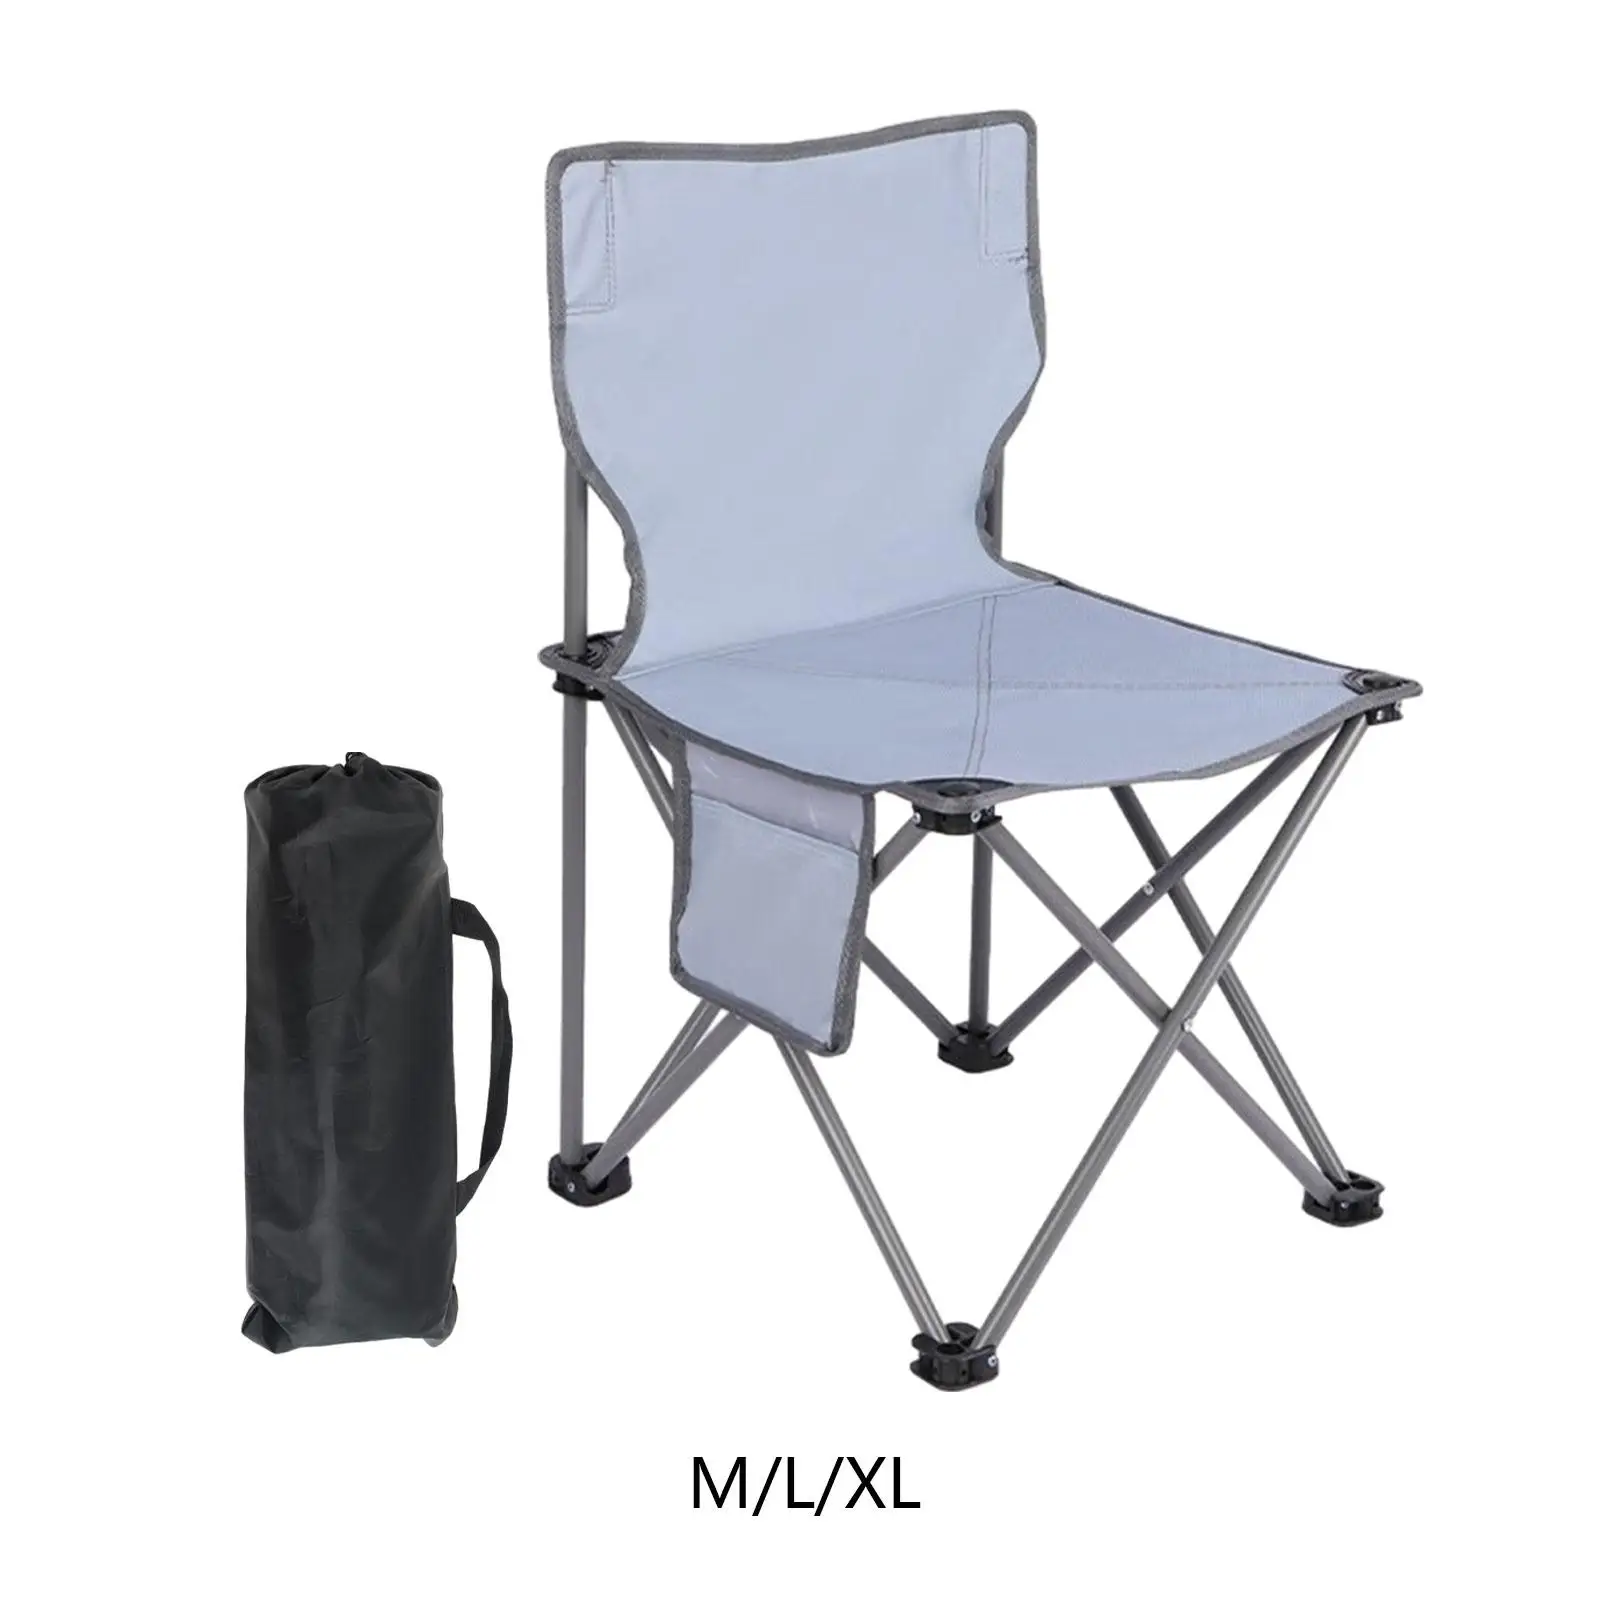 Portable Camping Chair Outdoor Furniture with Side Pocket Heavy Duty Collapsible Chair for Park Concert Backpacking Beach Garden